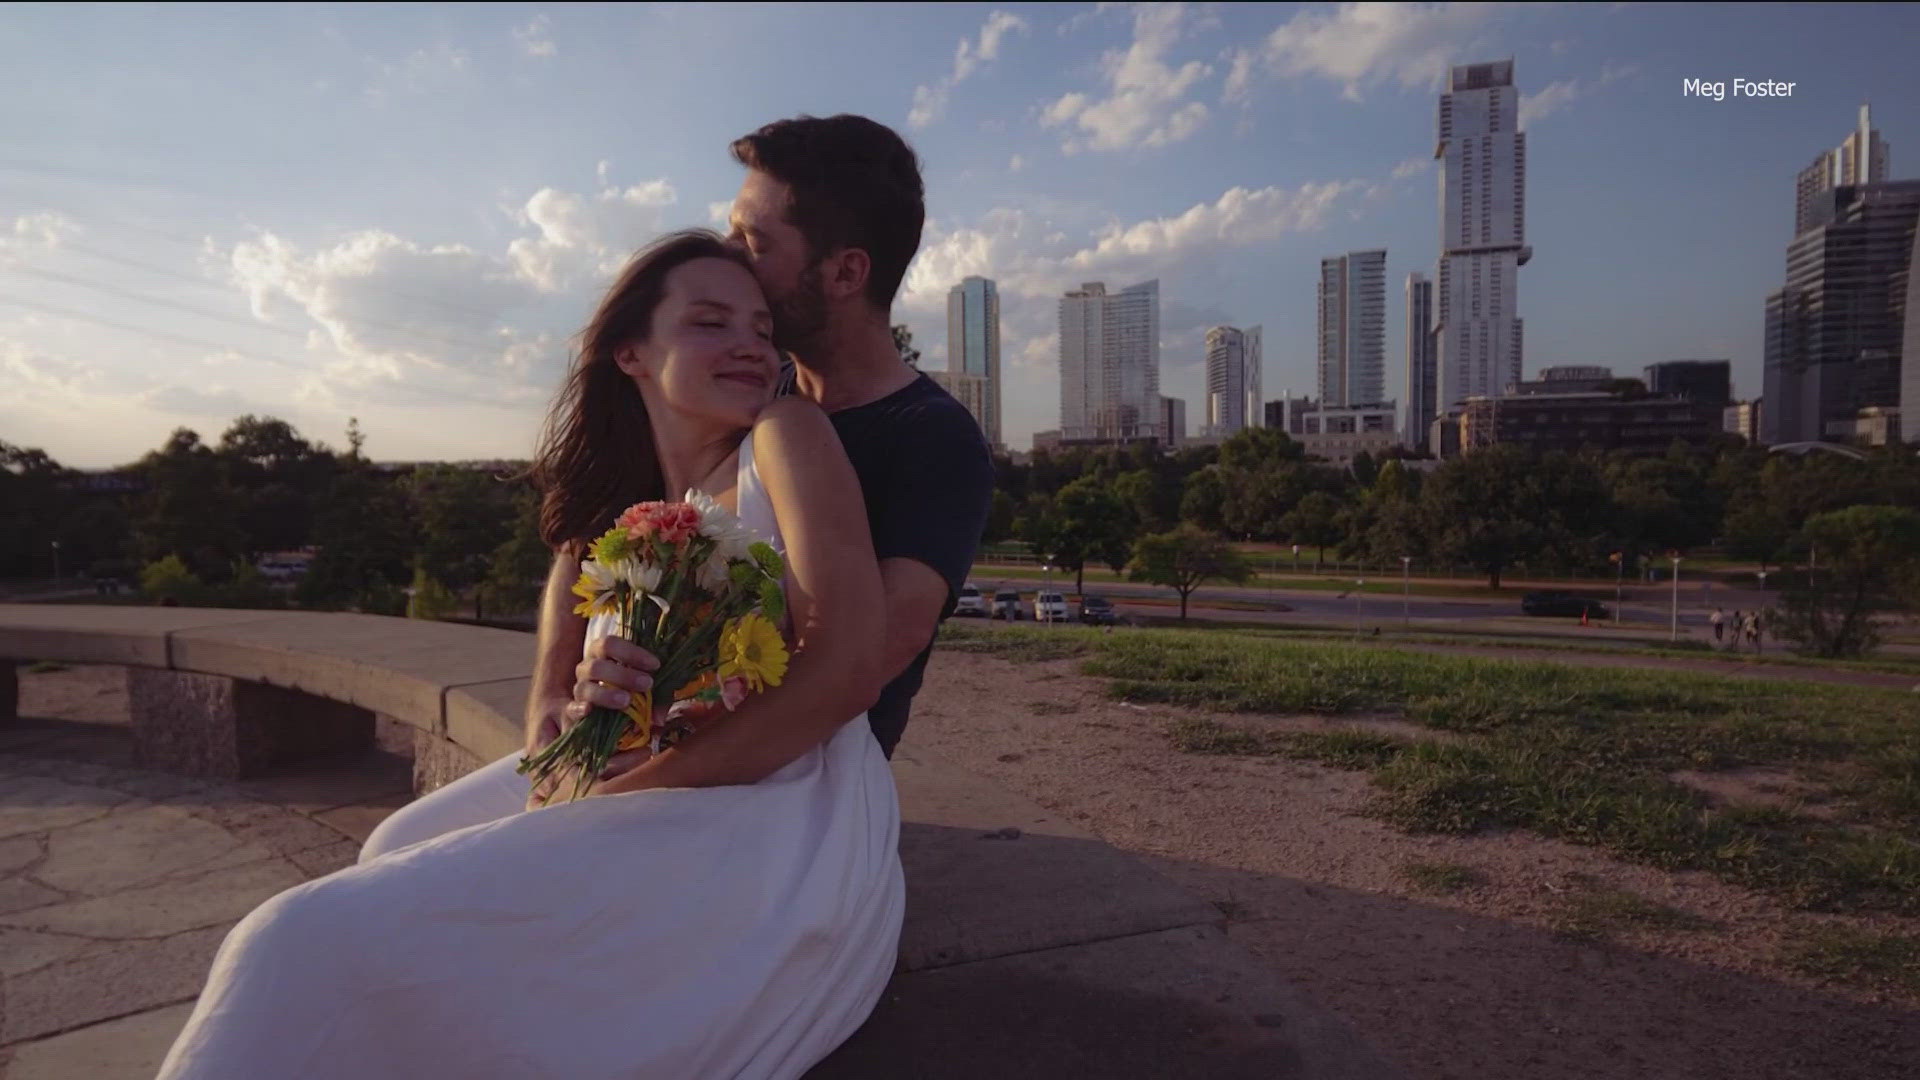 After Beryl, a couple decided to take refuge in Austin by staying with friends. While driving from Houston, they figured they could continue their love story.